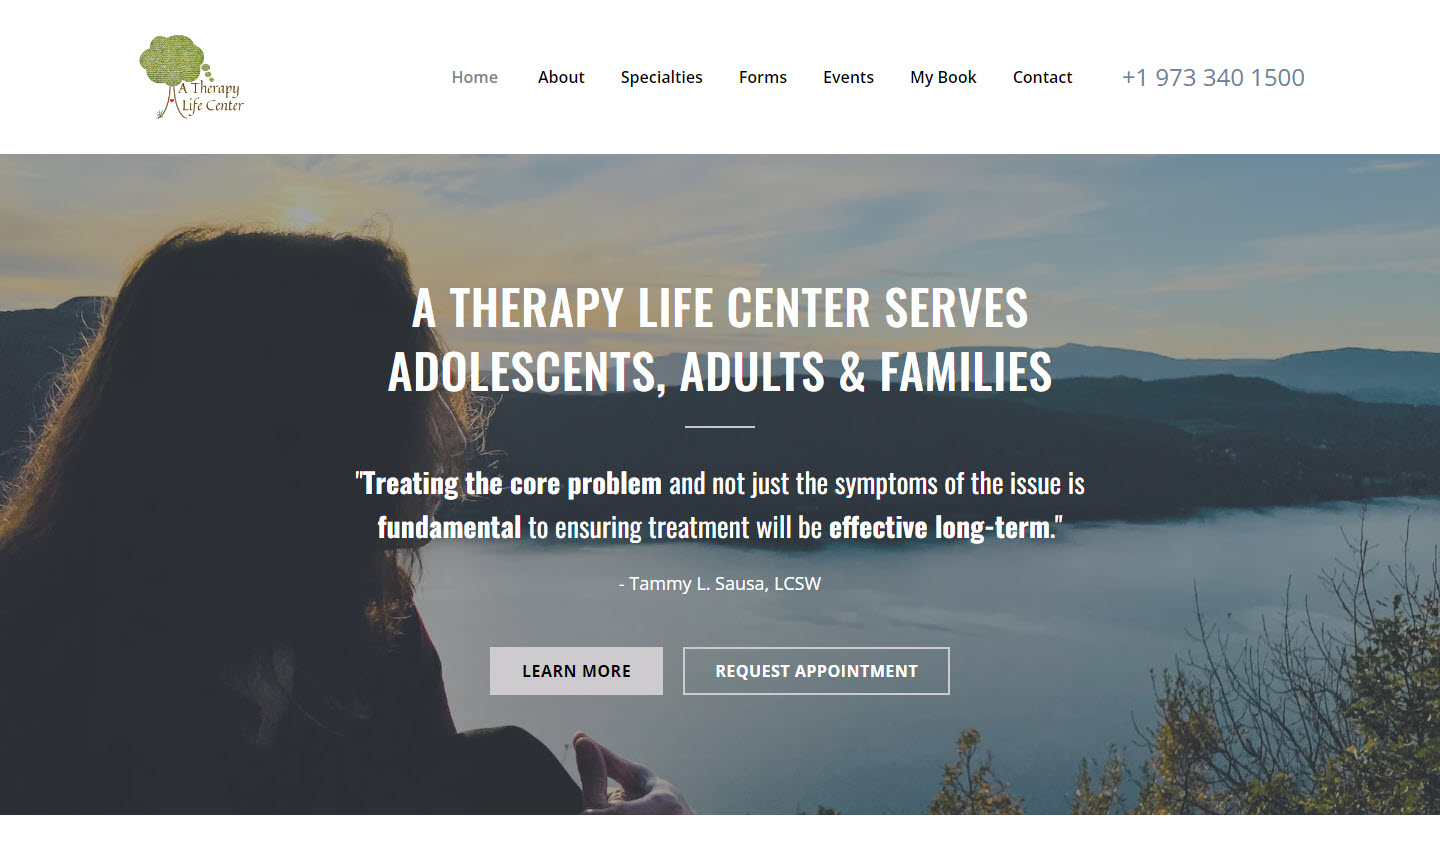 A Therapy Life Center Serves Adolescents, Adults & Families